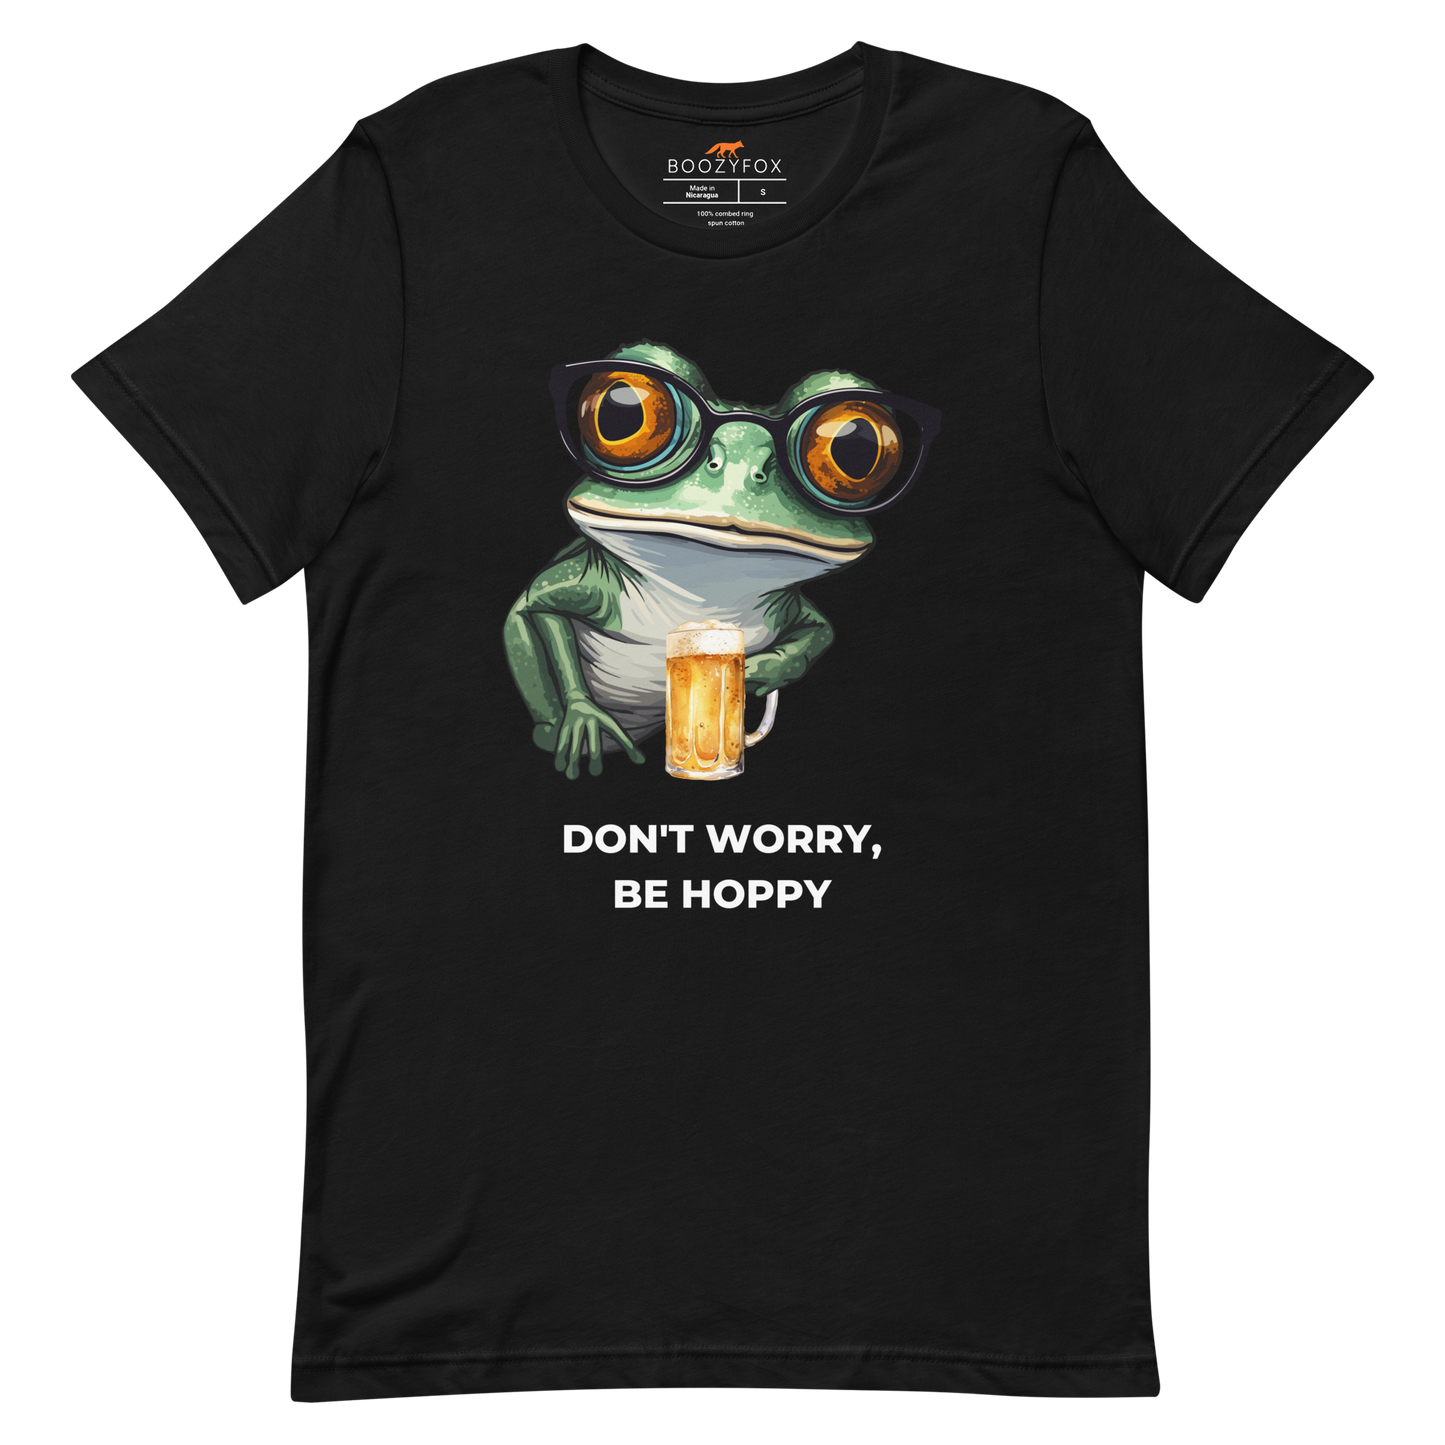 Black Premium Frog Tee featuring a funny Don't Worry, Be Hoppy graphic on the chest - Funny Graphic Frog Tees - Boozy Fox